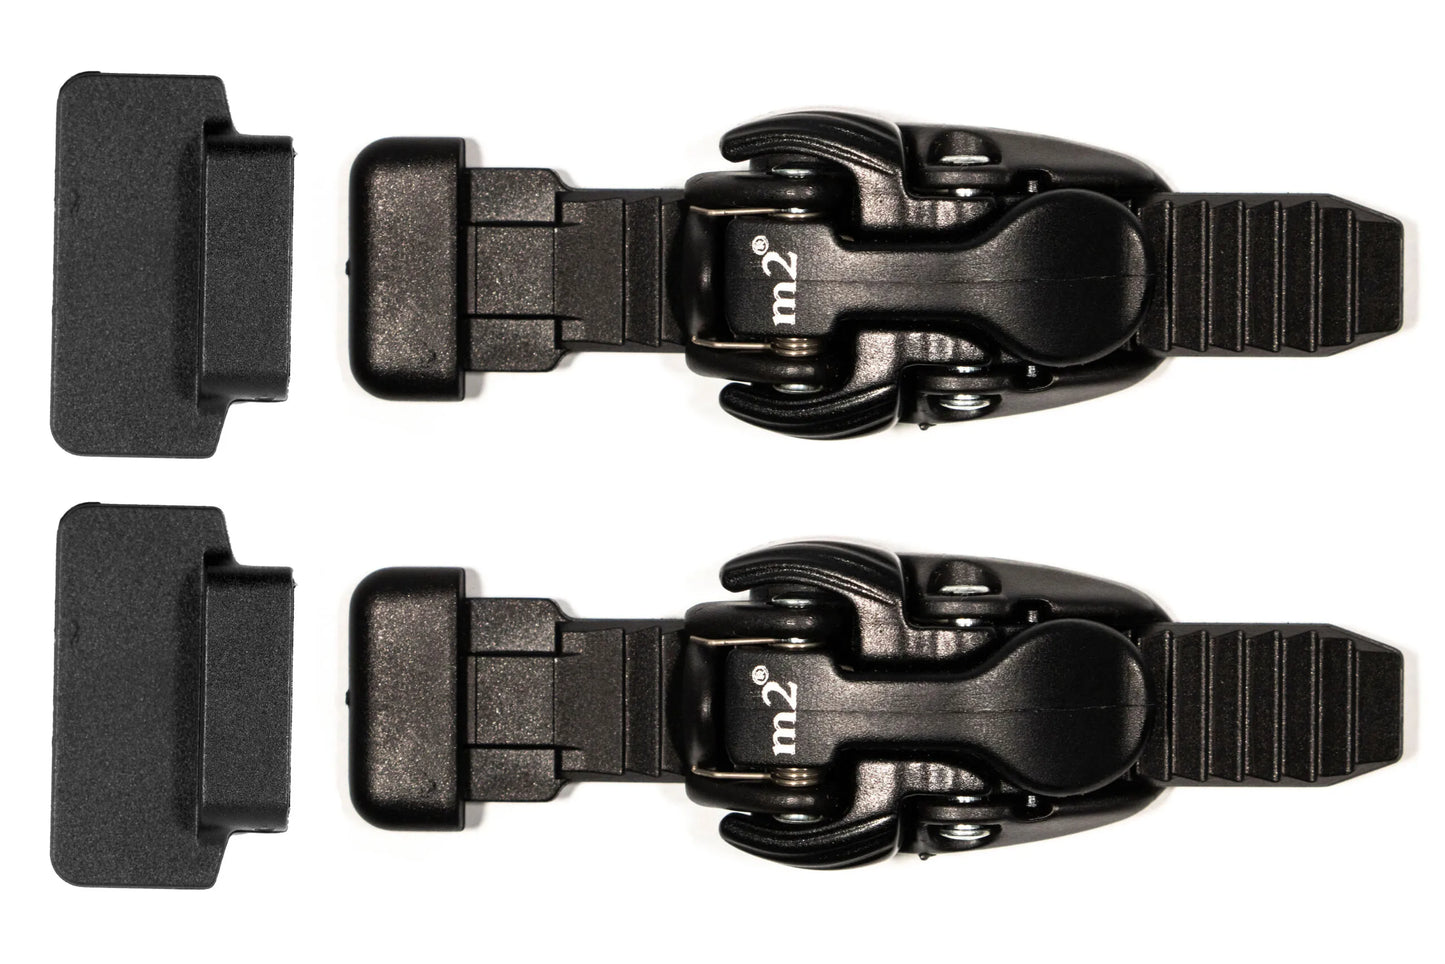 Footwear Buckle and Strap Replacement KIT